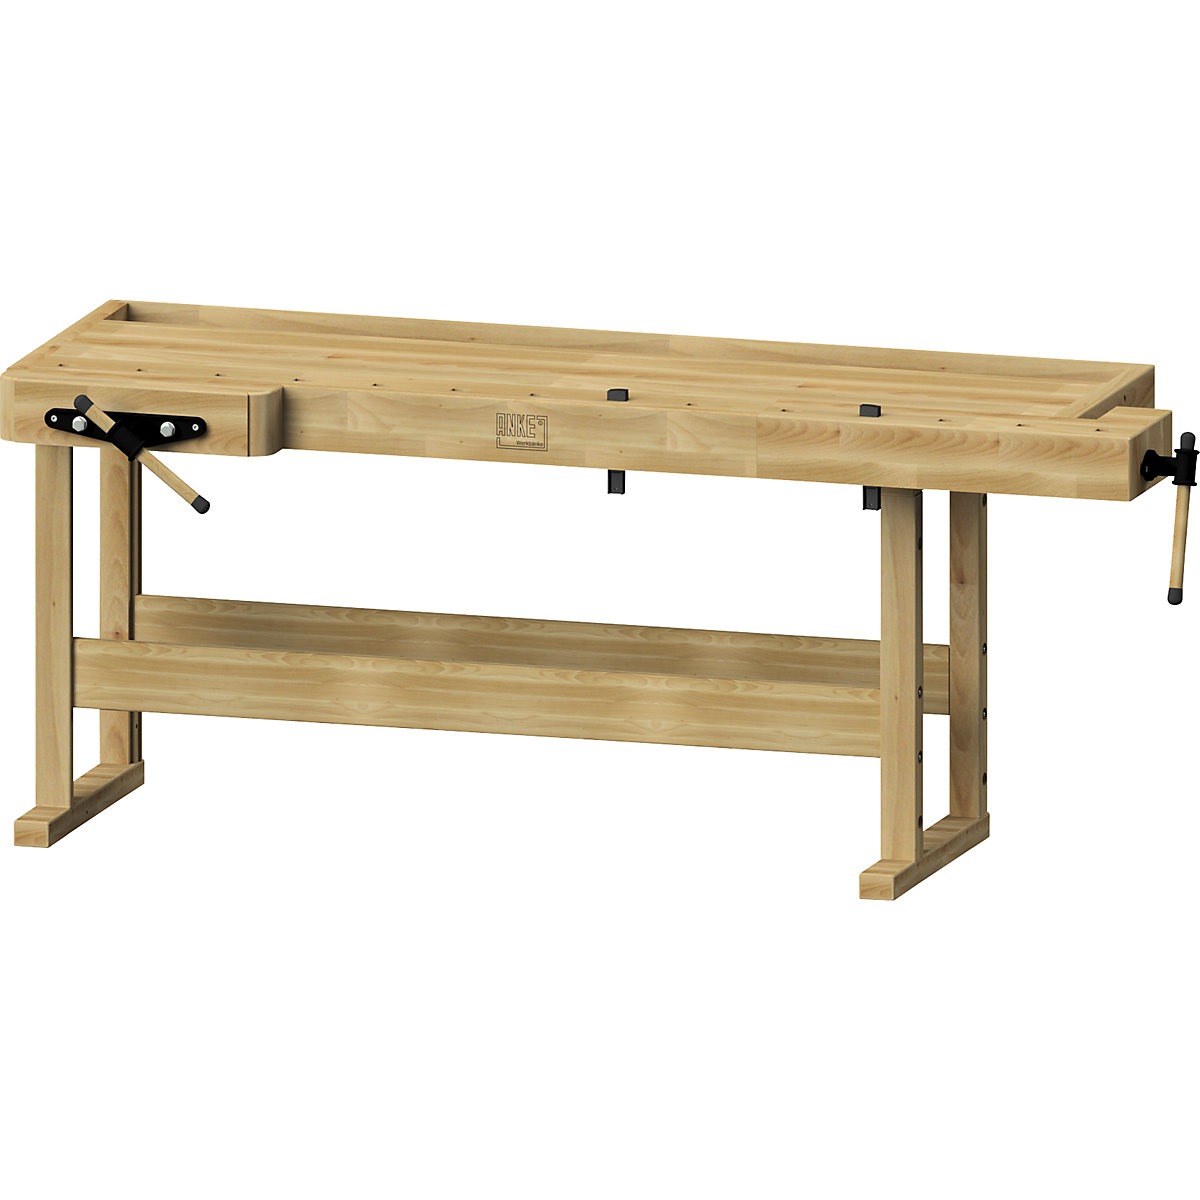 Professional carpenters' planing bench – ANKE